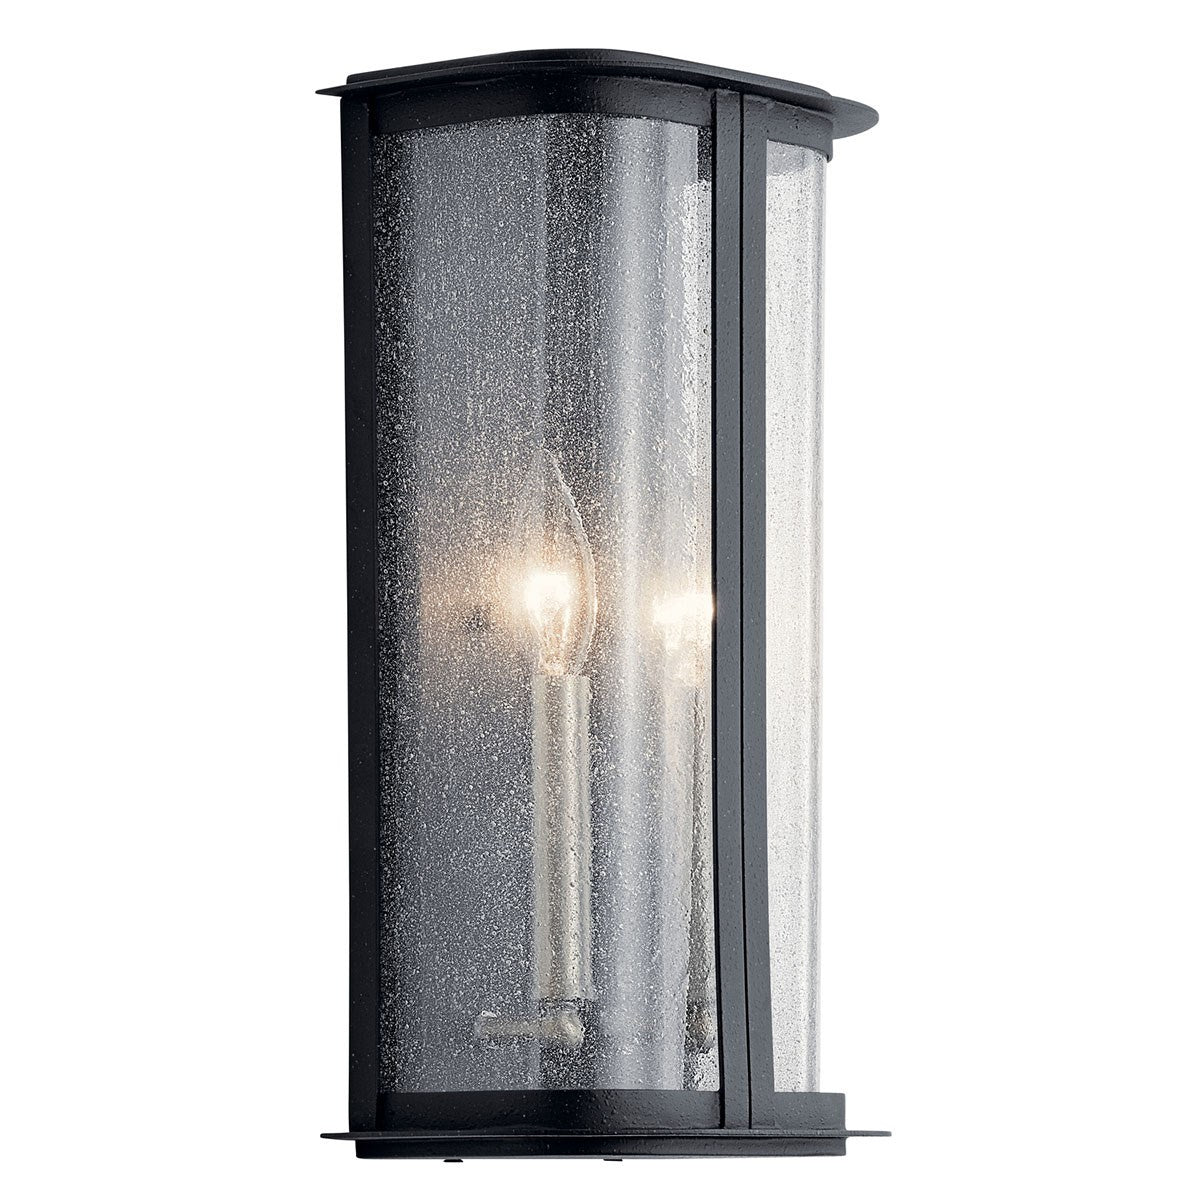 Kichler Canada - Two Light Outdoor Wall Mount - Timmin - Distressed Black- Union Lighting Luminaires Decor